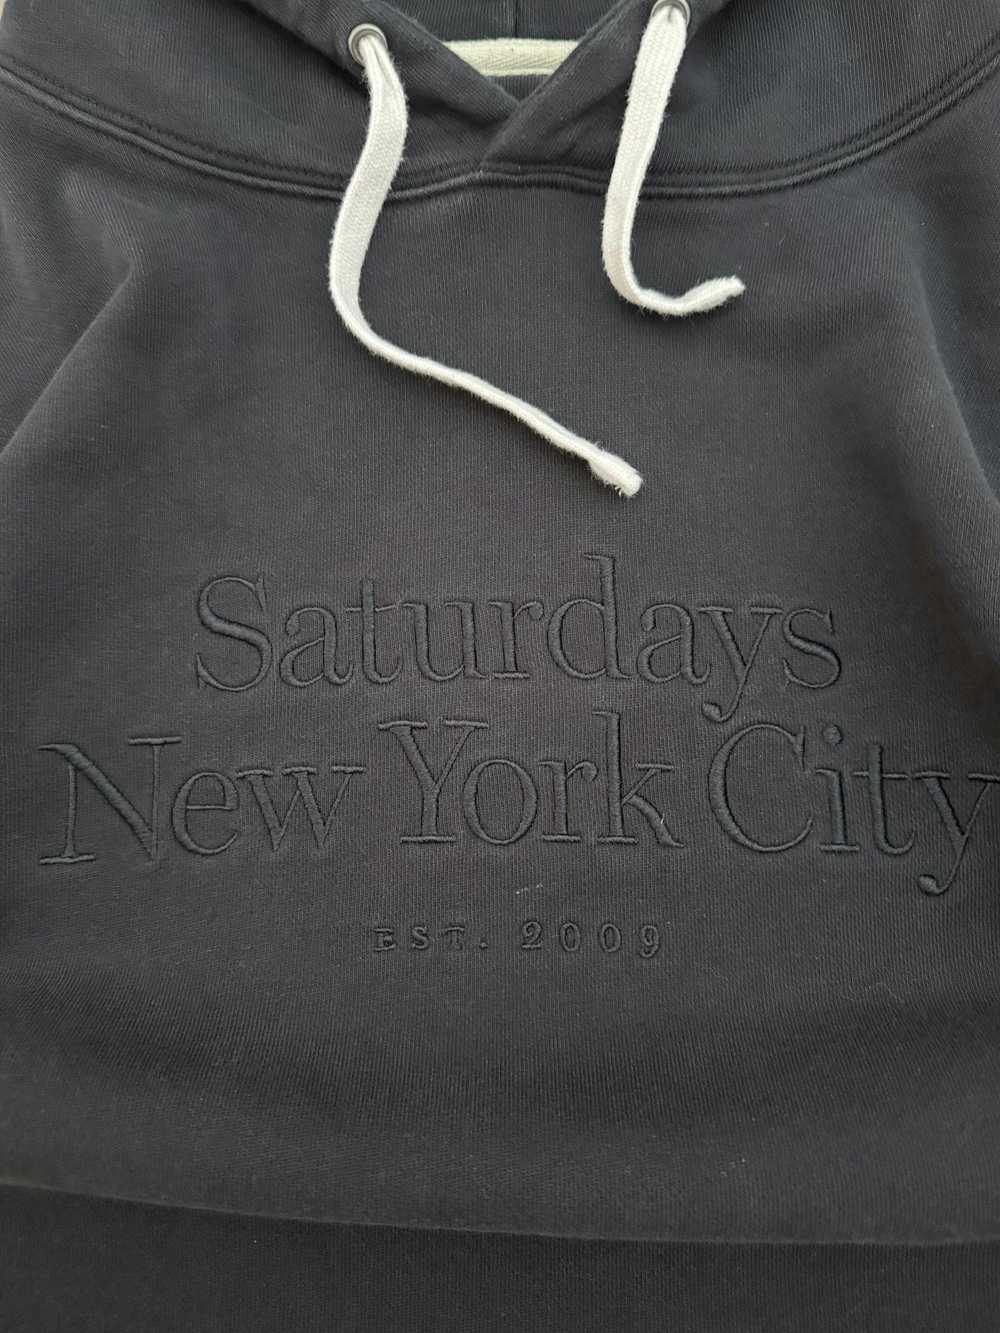 Saturdays New York City EMBROIDERED SPELLOUT BLAC… - image 5